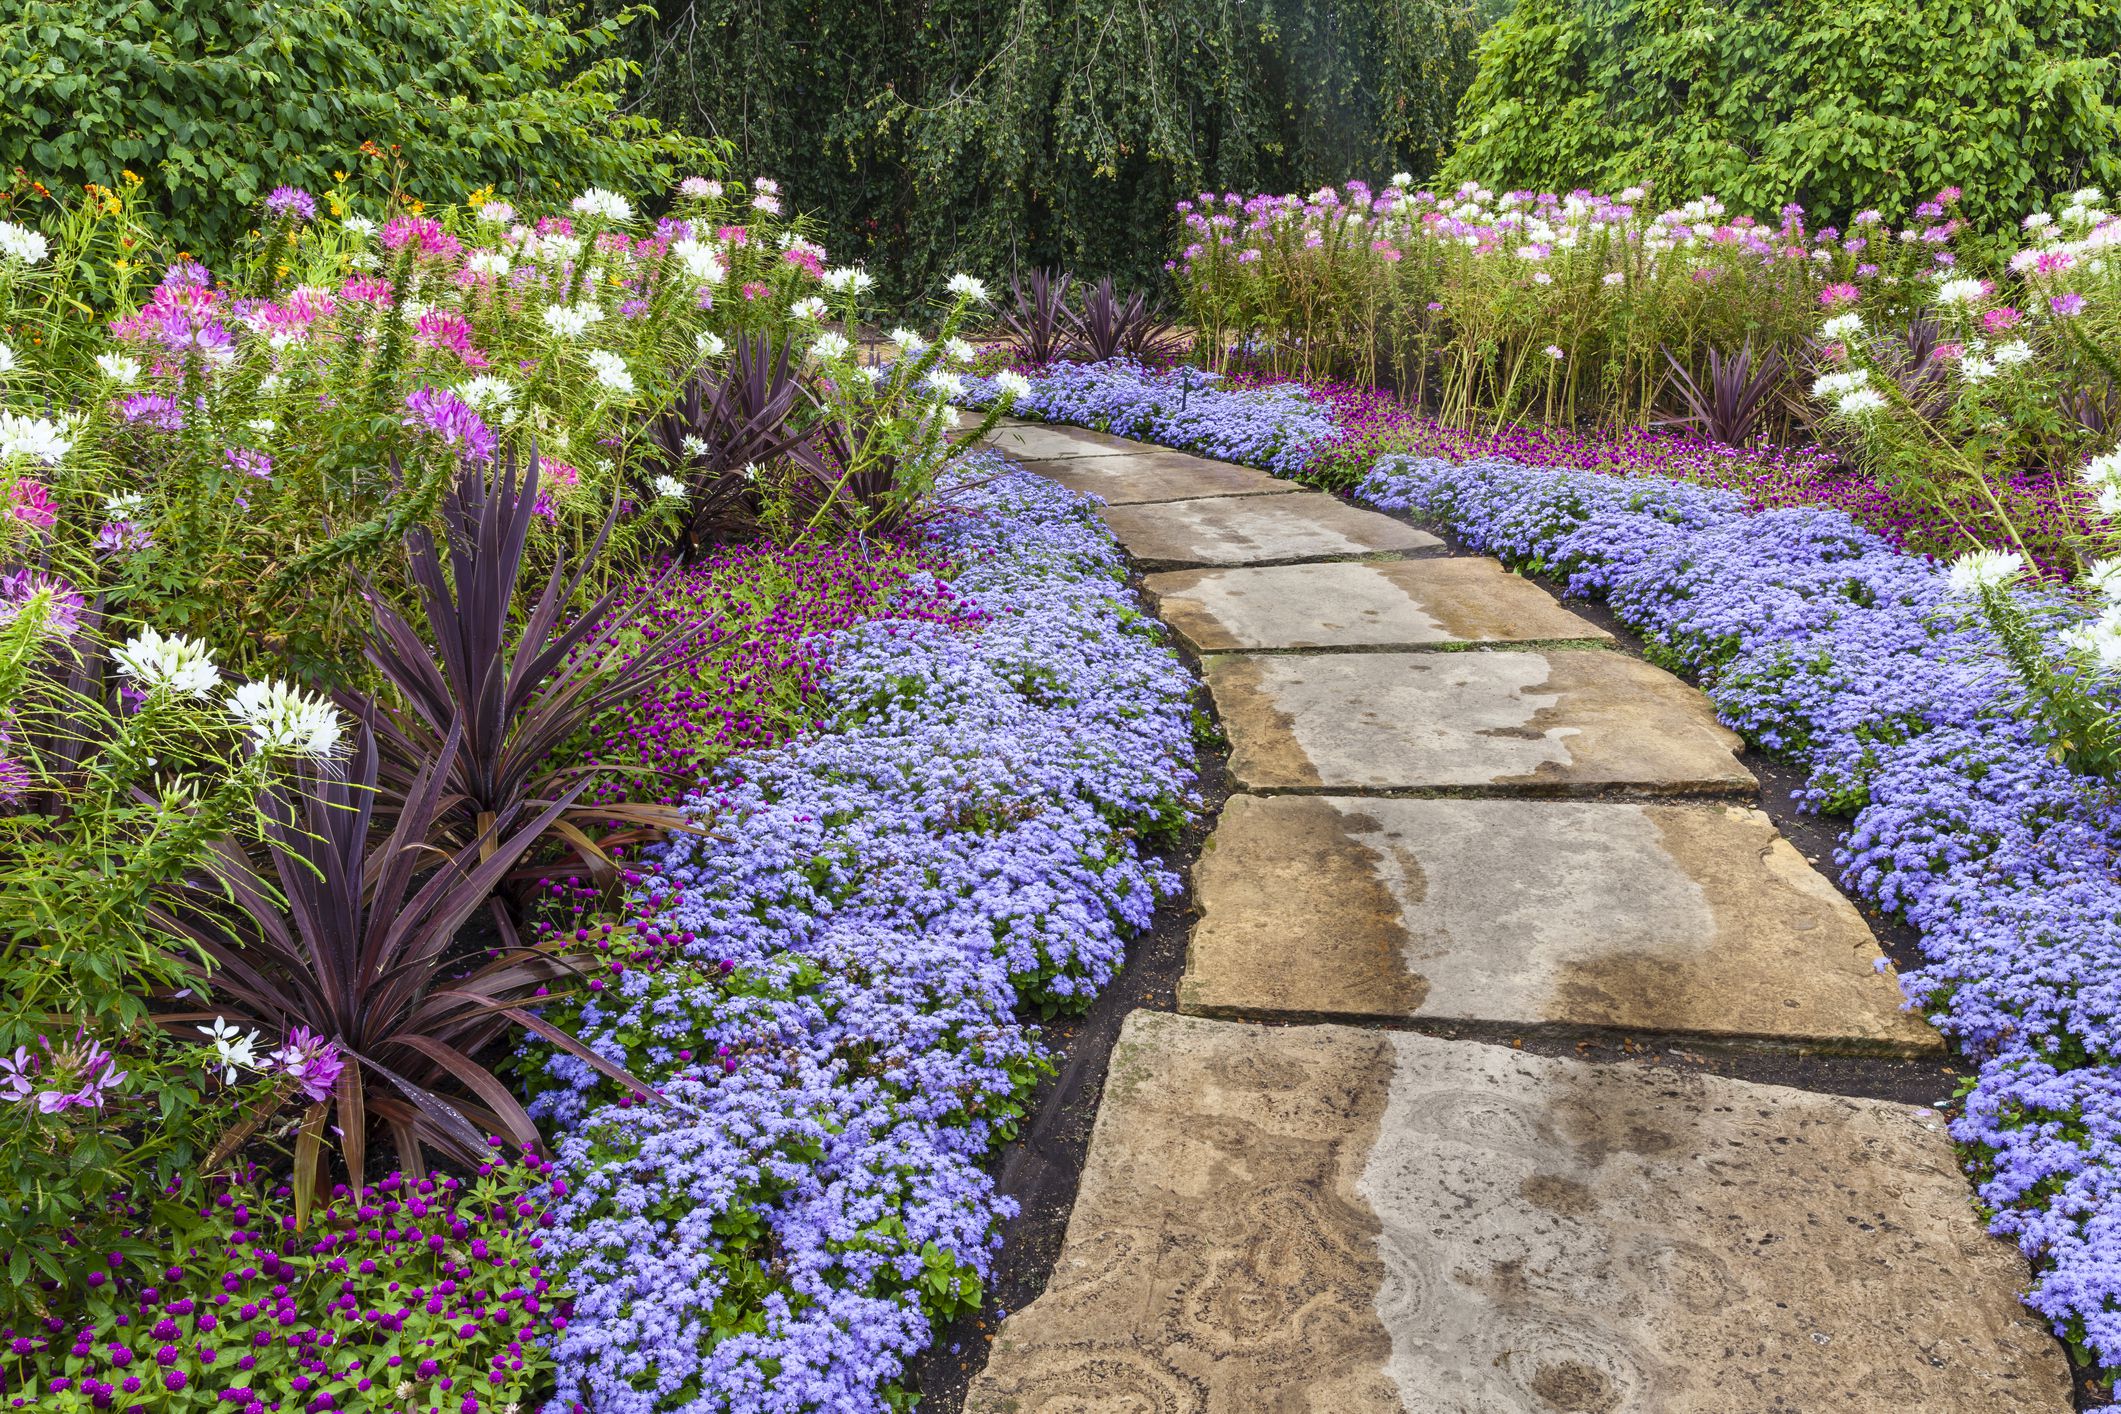 Landscaping on a Budget: 5 Easy Money-Saving Ideas